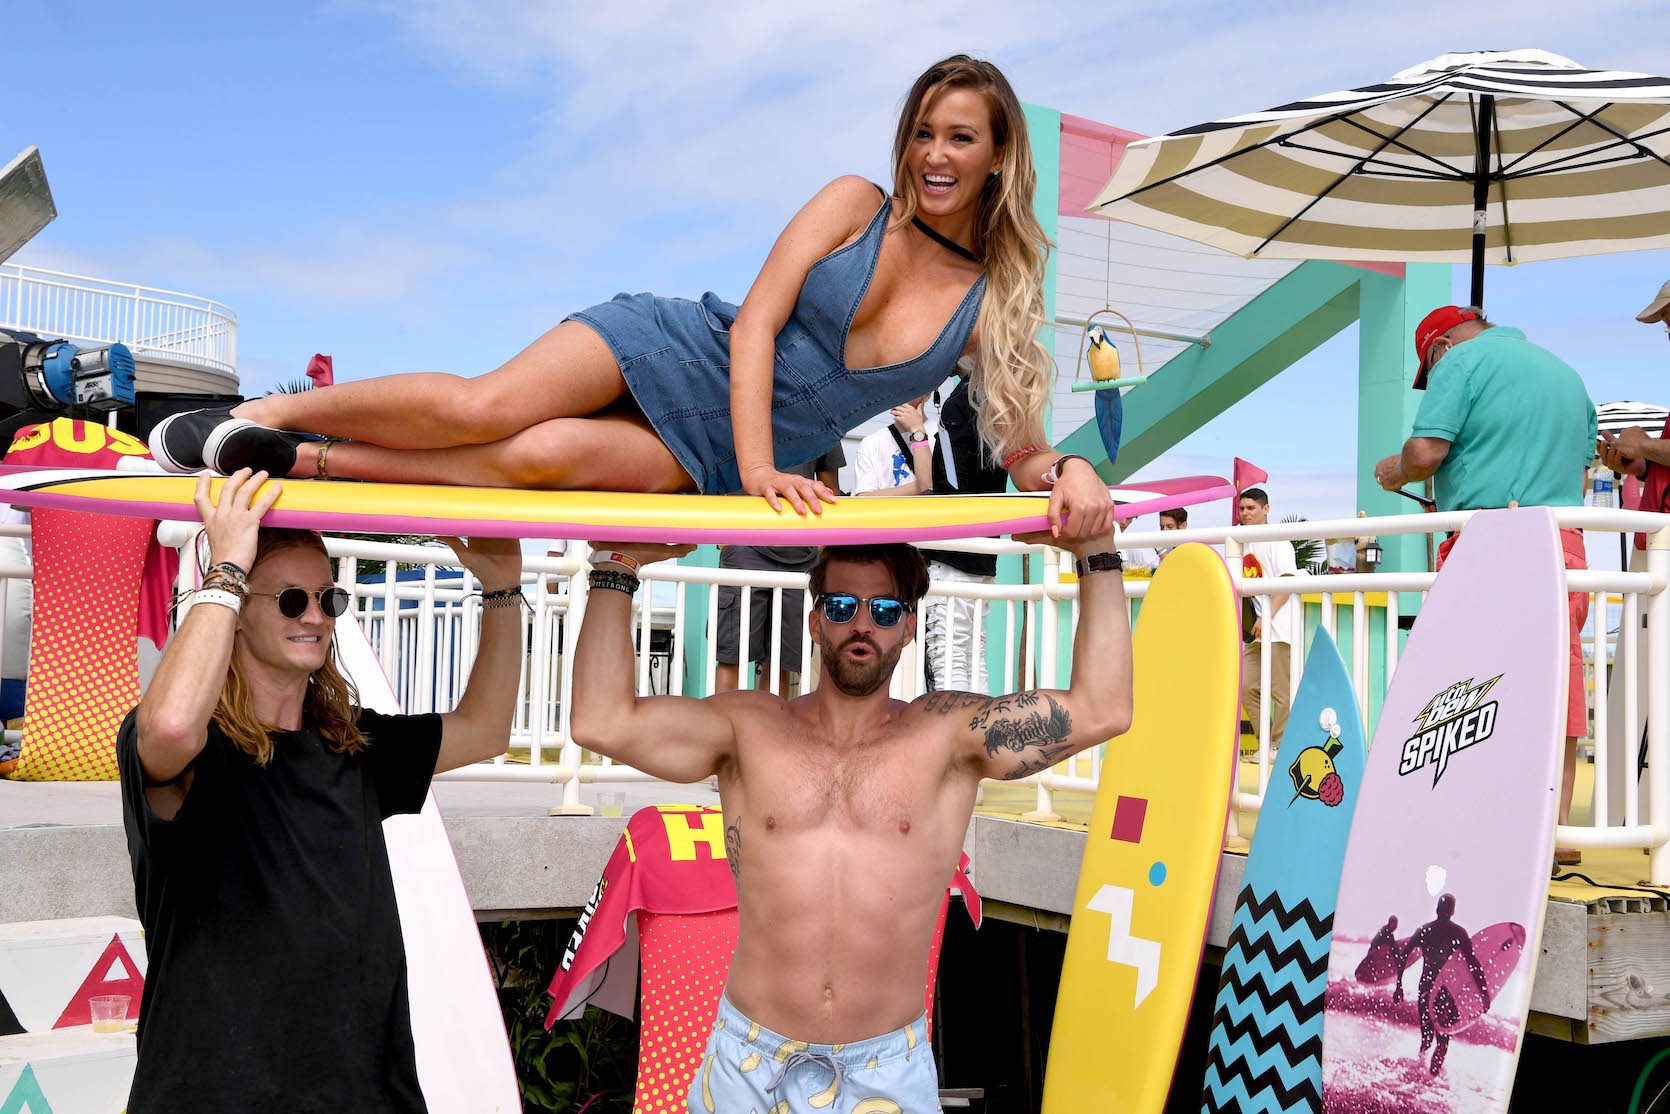 Ashley Mitchell lying on a surf board held up by Johnny 'Bananas' Devenanzio on the beach. MTV's 'The Challenge' Season 37 spoilers note Ashley Mitchell wins the elimination in episode 10.